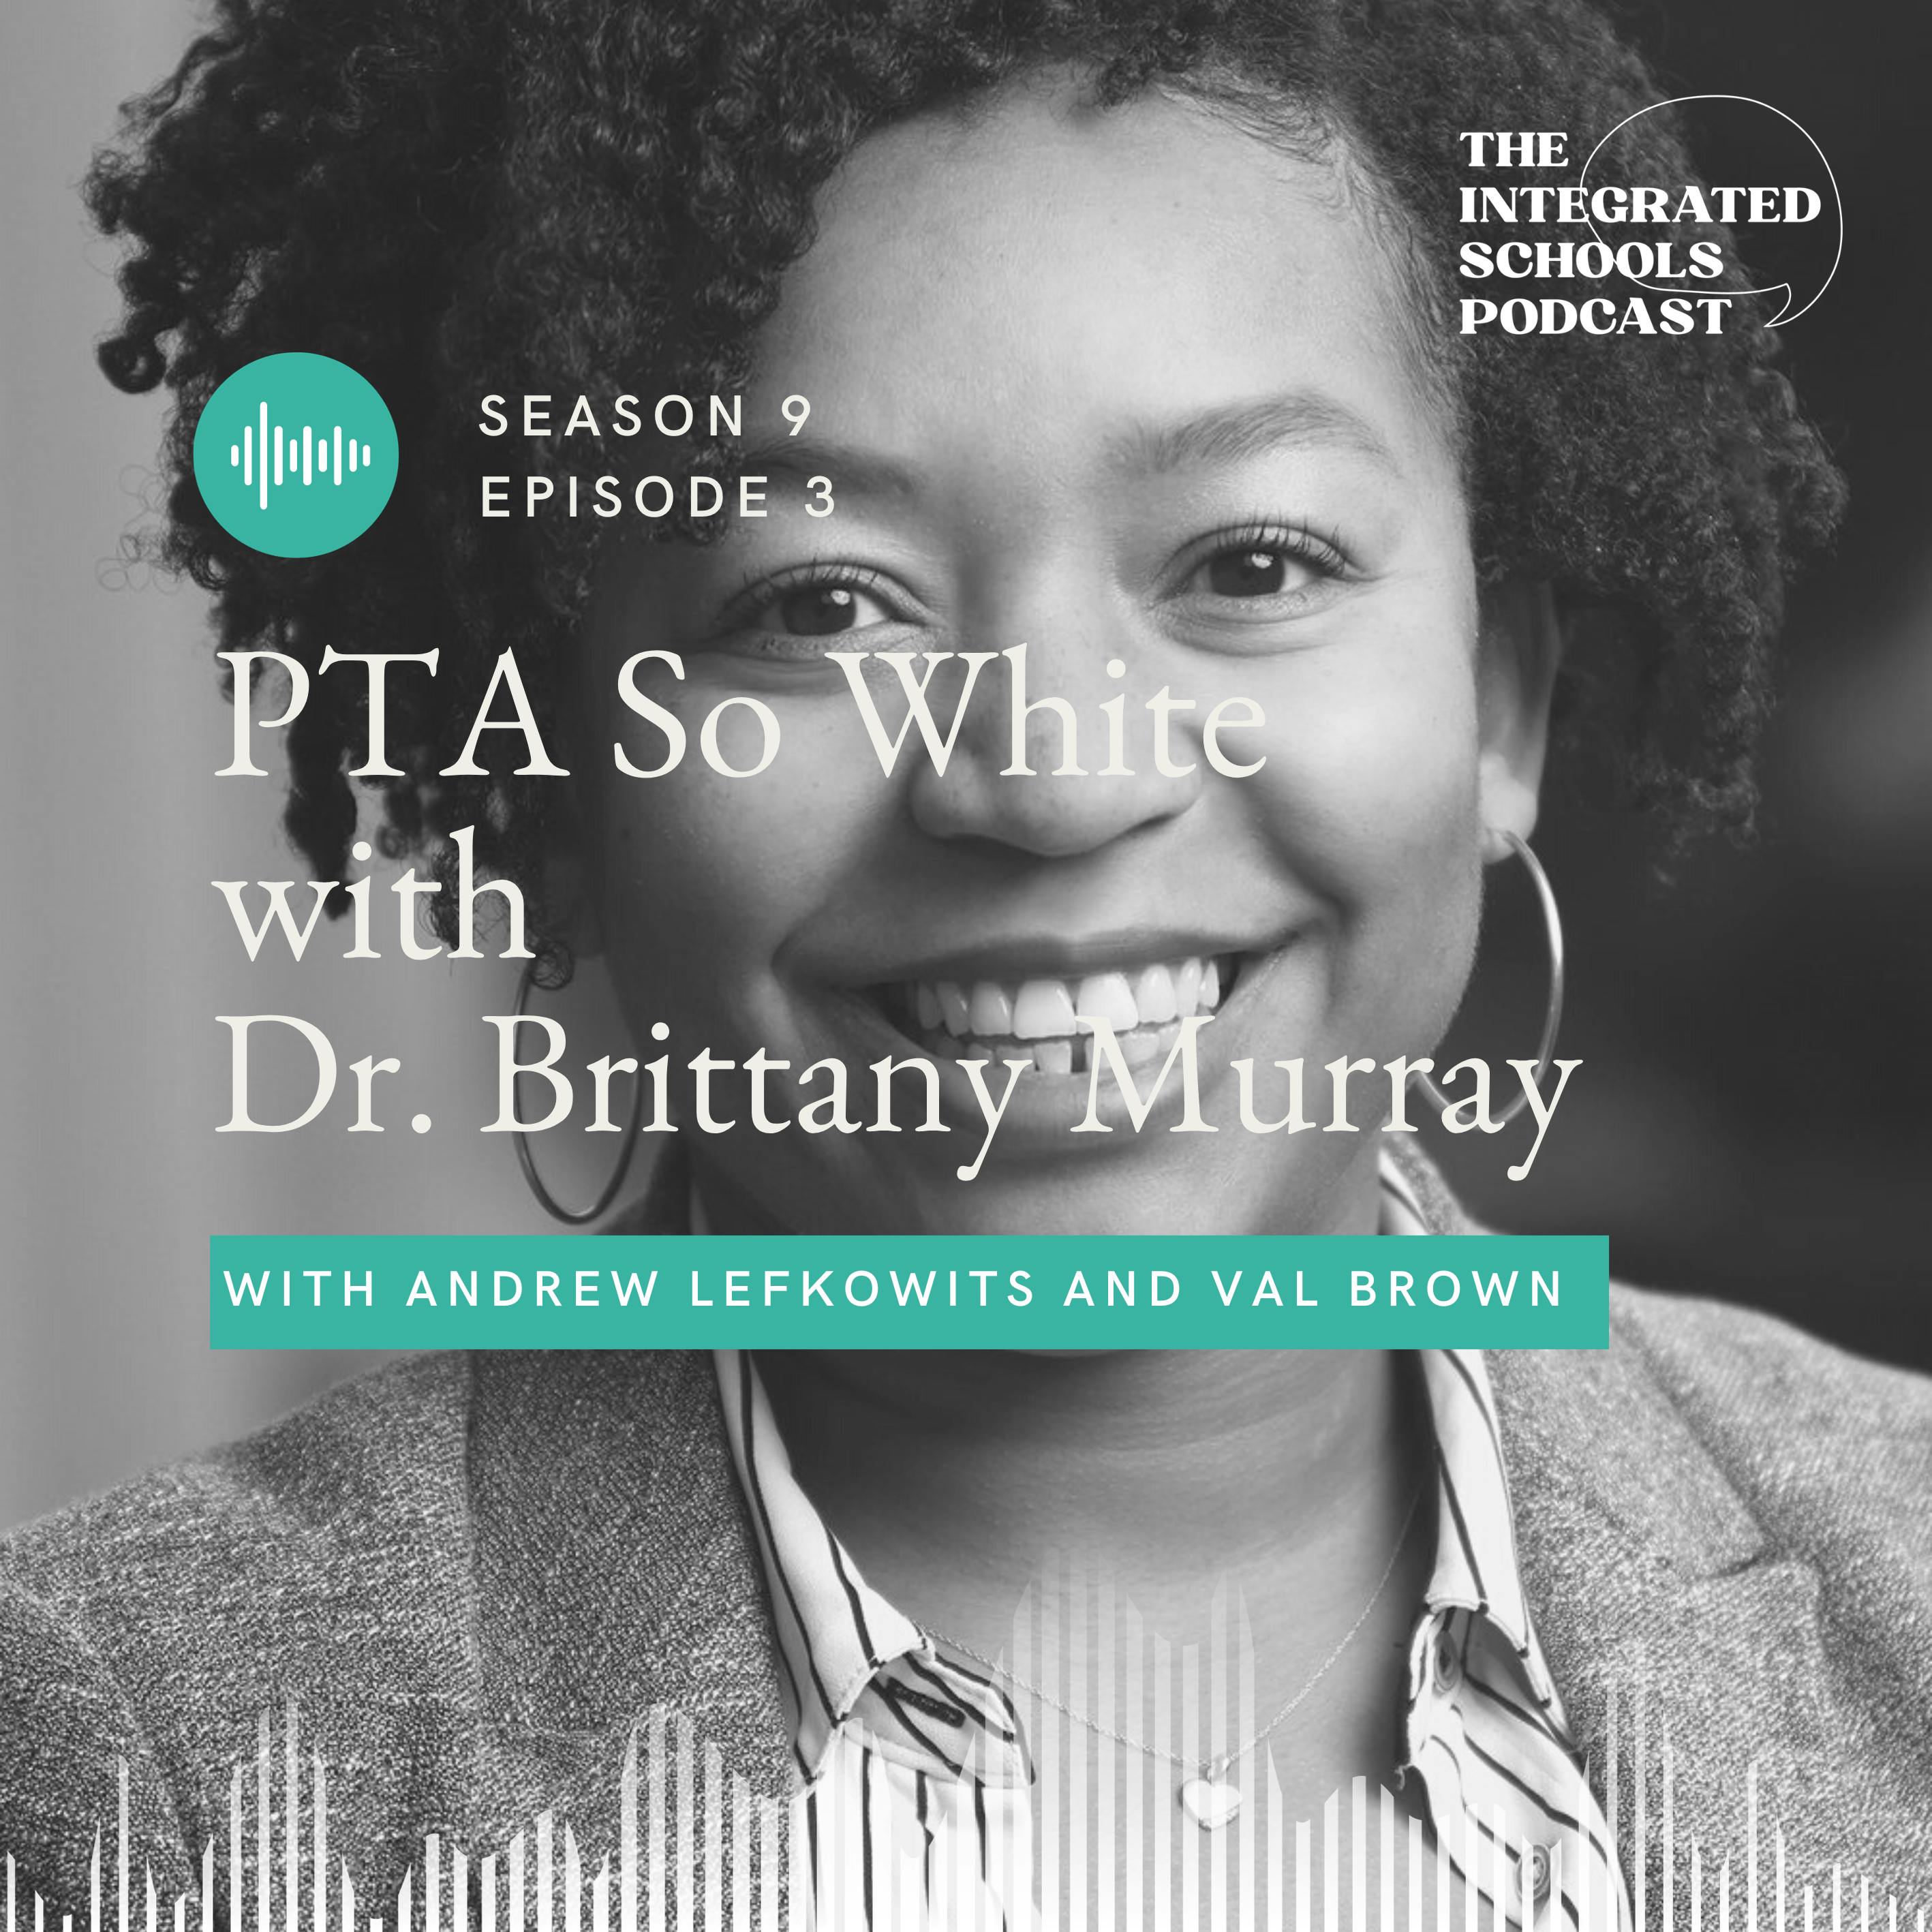 PTA So White with Dr. Brittany Murray